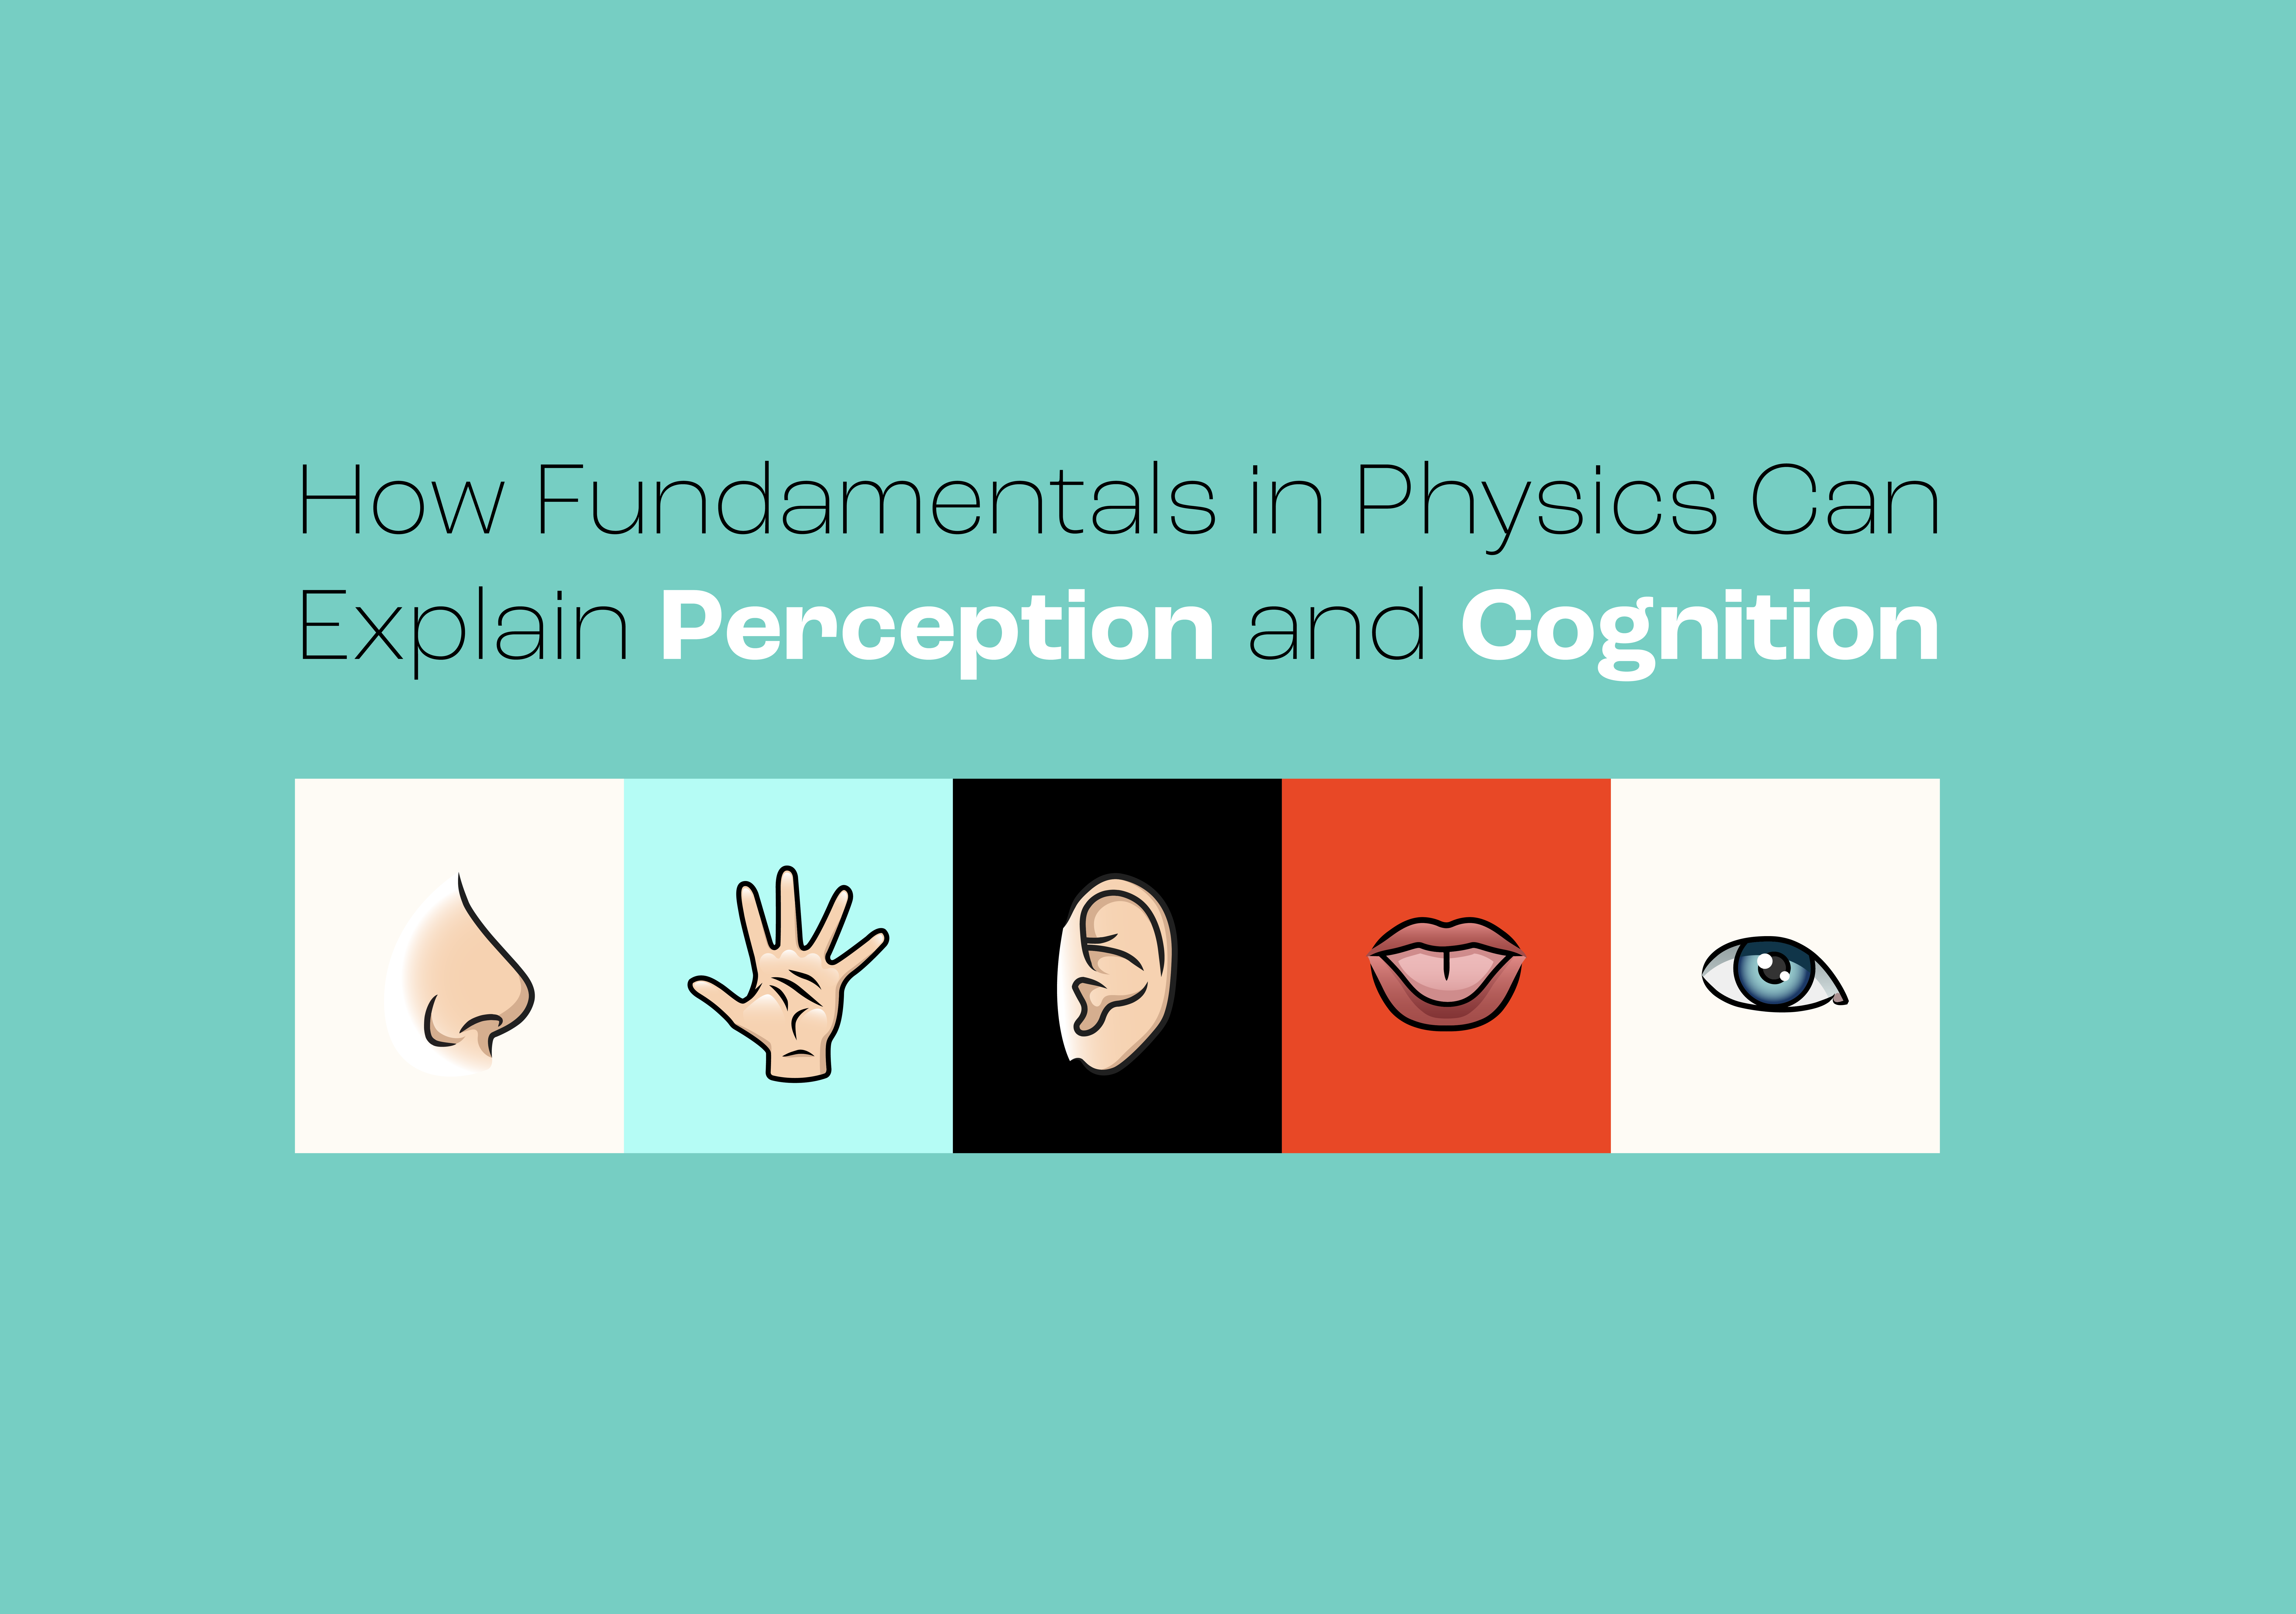 Professor Zygmunt Pizlo | How Fundamentals in Physics Can Explain Perception and Cognition